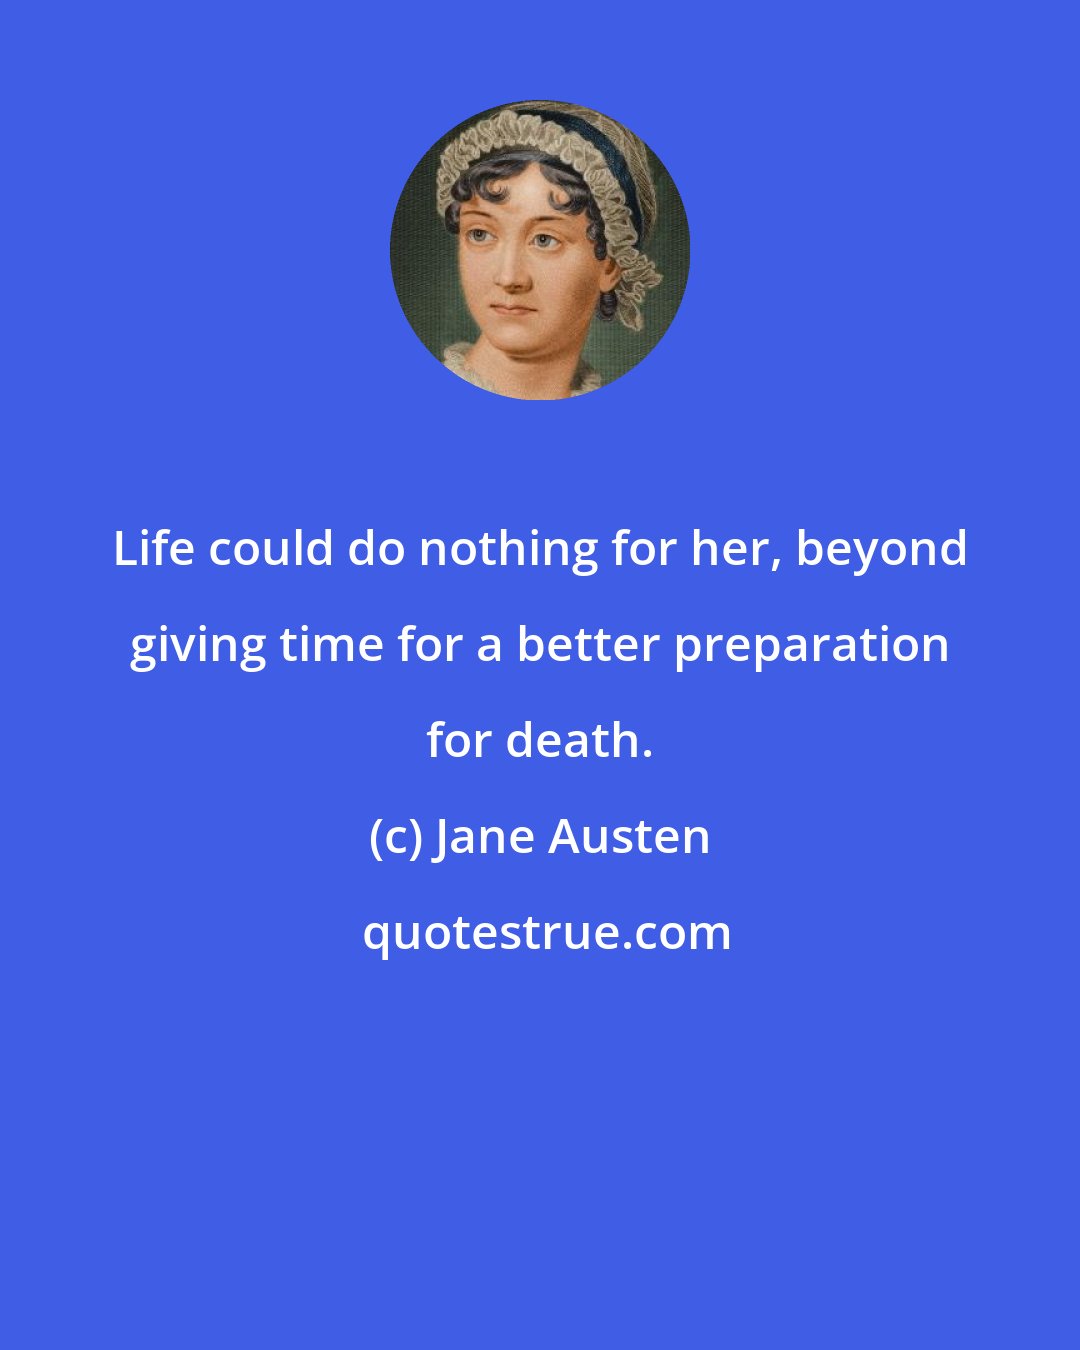 Jane Austen: Life could do nothing for her, beyond giving time for a better preparation for death.